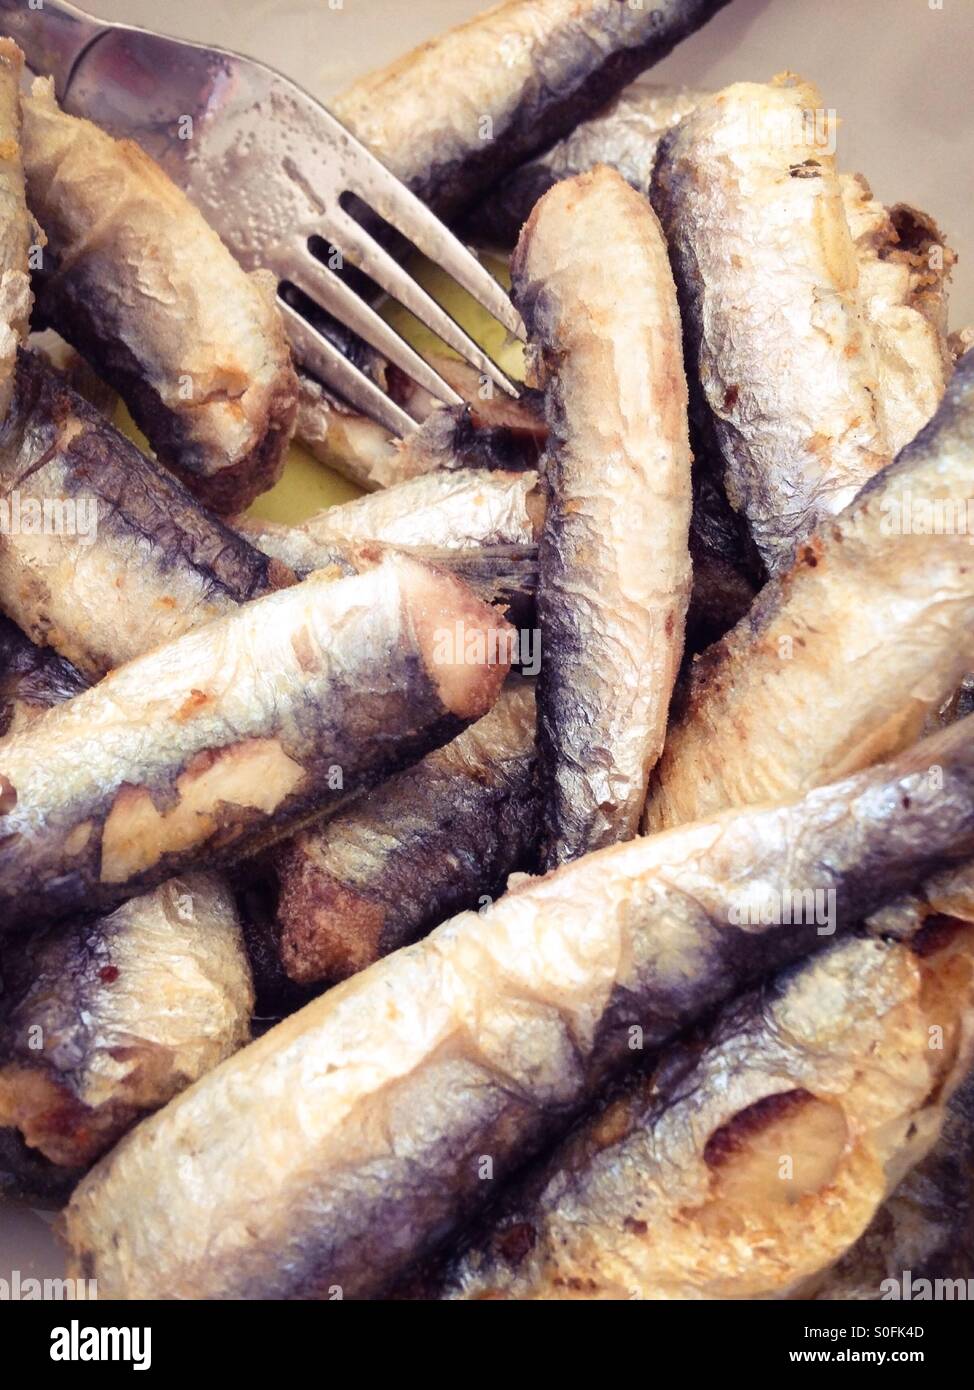 Baked sardines and anchovies in olive oil close up Stock Photo